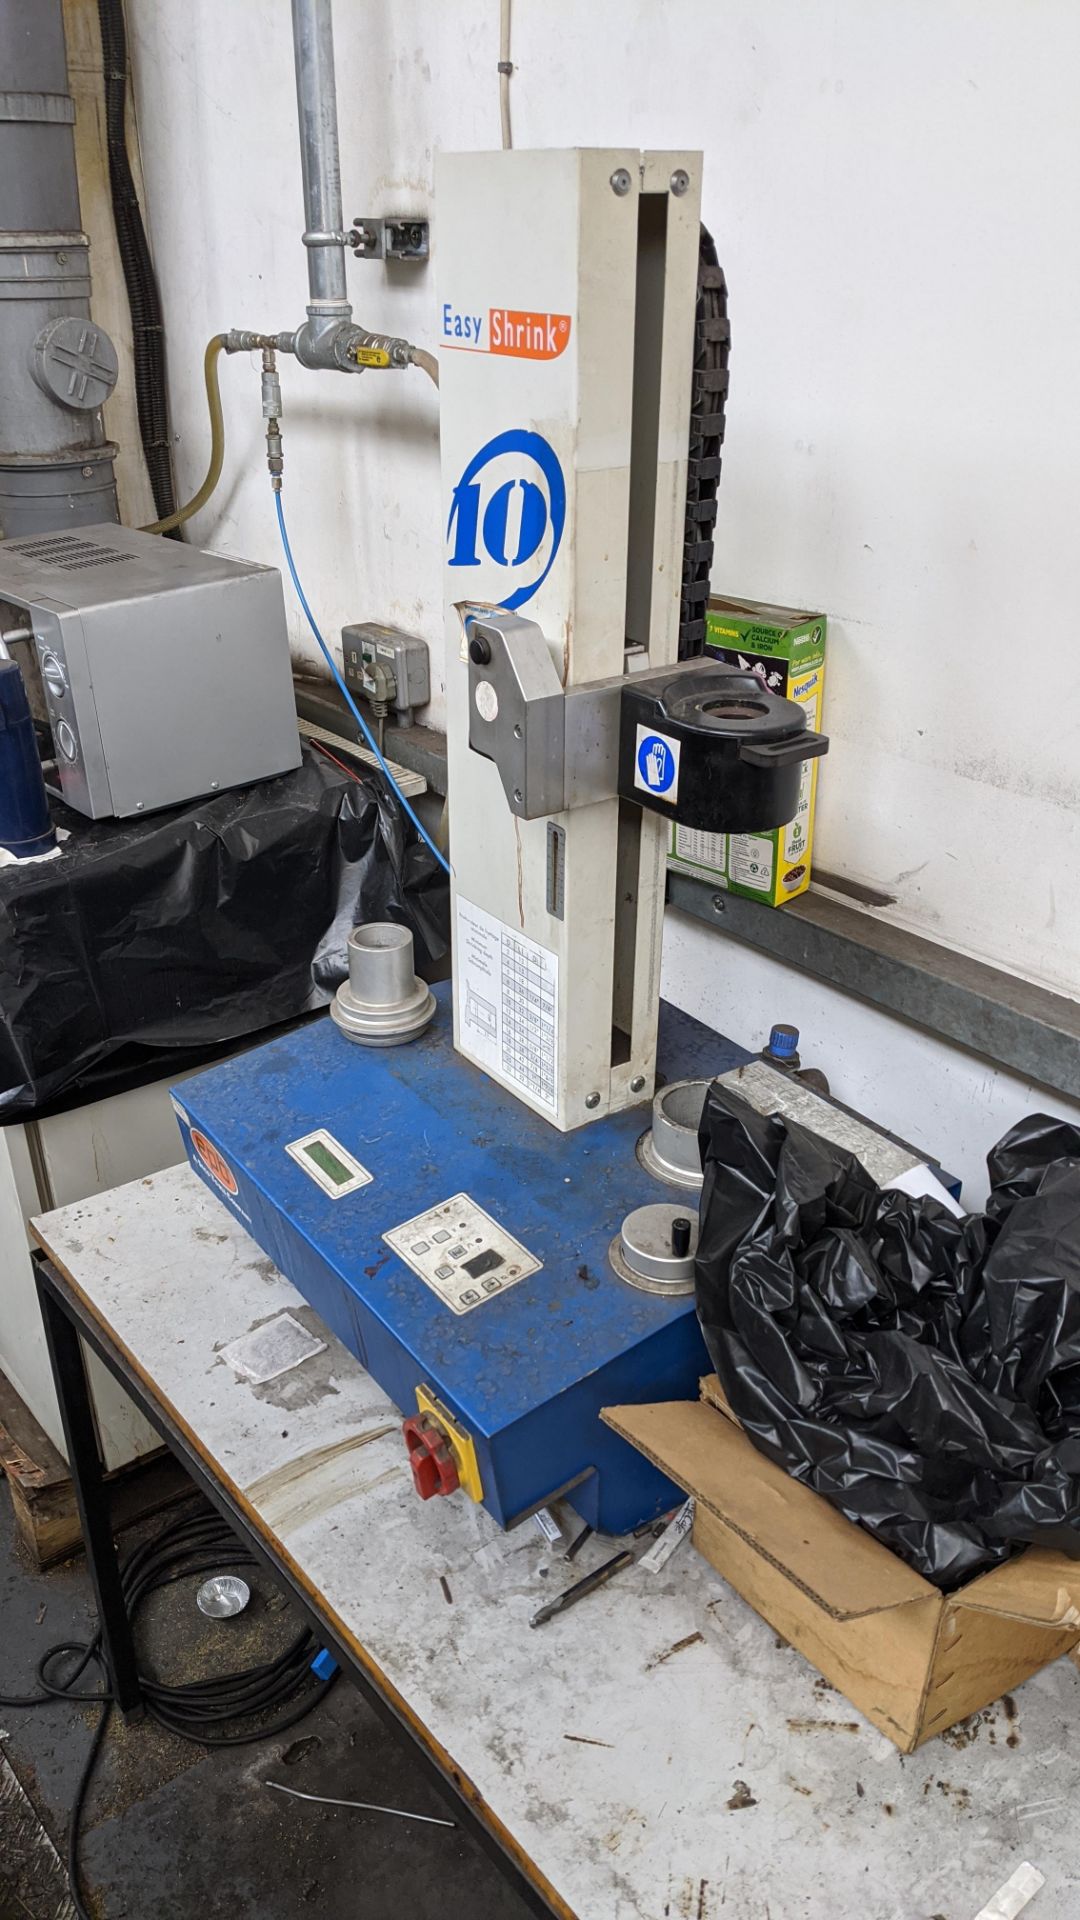 EPB Easy Shrink 10 plus table of tooling & all other items as pictured adjacent to this machine, - Image 12 of 12